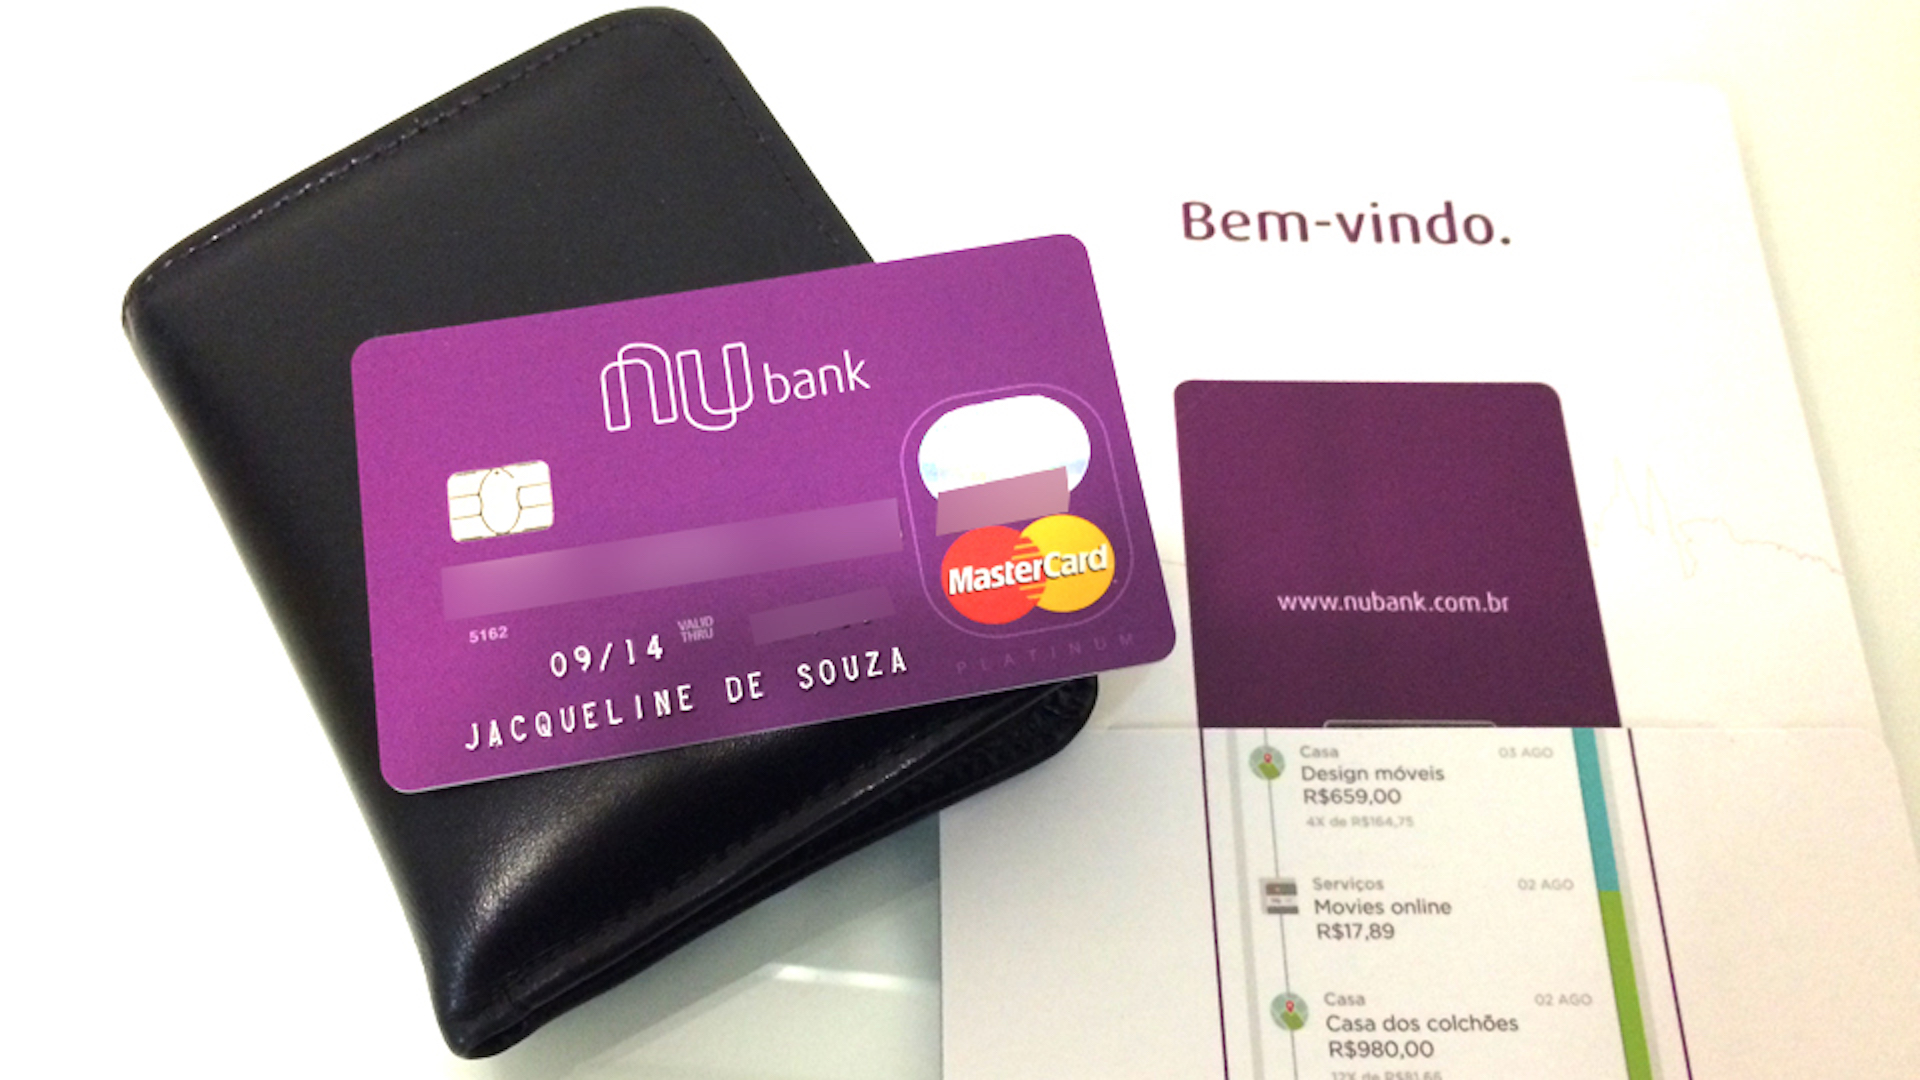 Brazil's NuBank received foreign investments and became one of six 'unicorn' companies operating in Brazil,